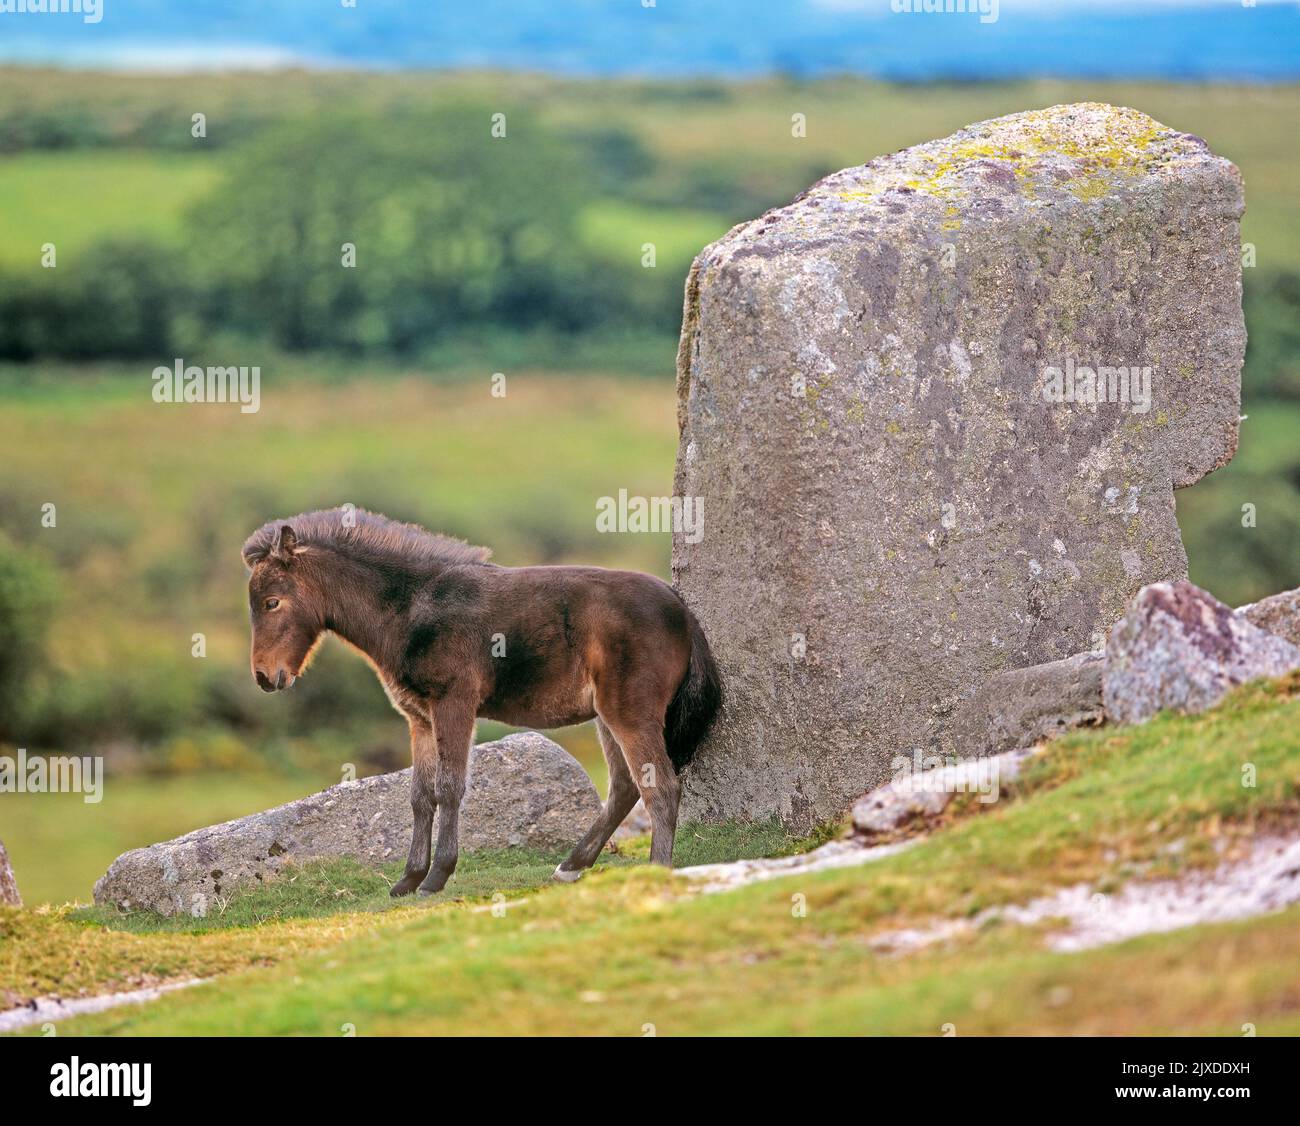 Free-ranging Dartmoor Pony. A foal rubs its buttock against a boulder. Dartmoor National Park, England Stock Photo